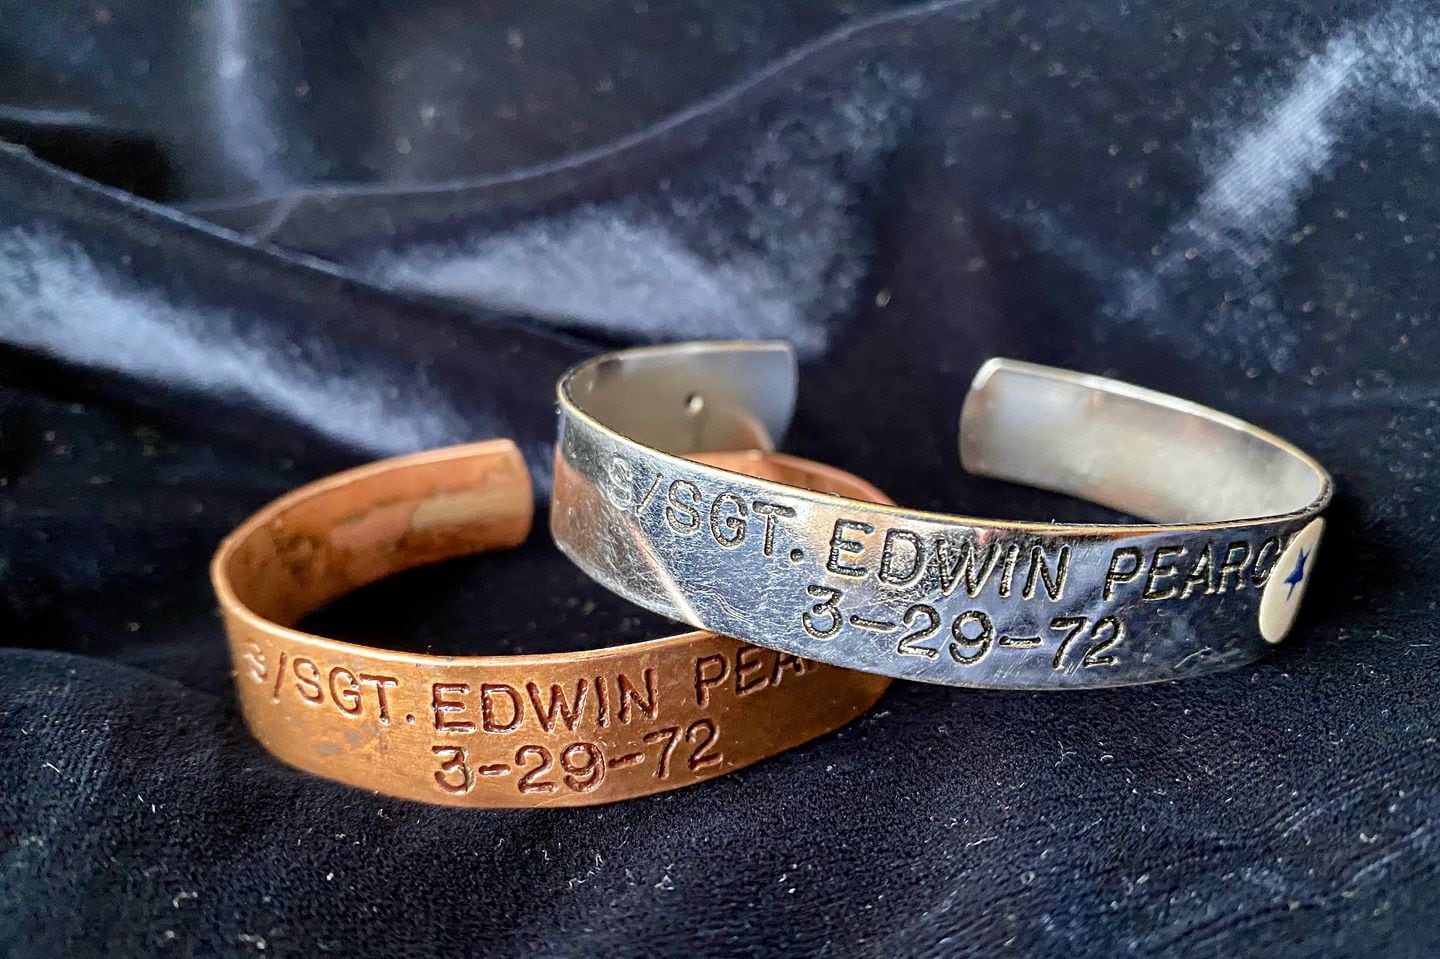 Strangers sent the author their bracelets engraved with her uncle's name.